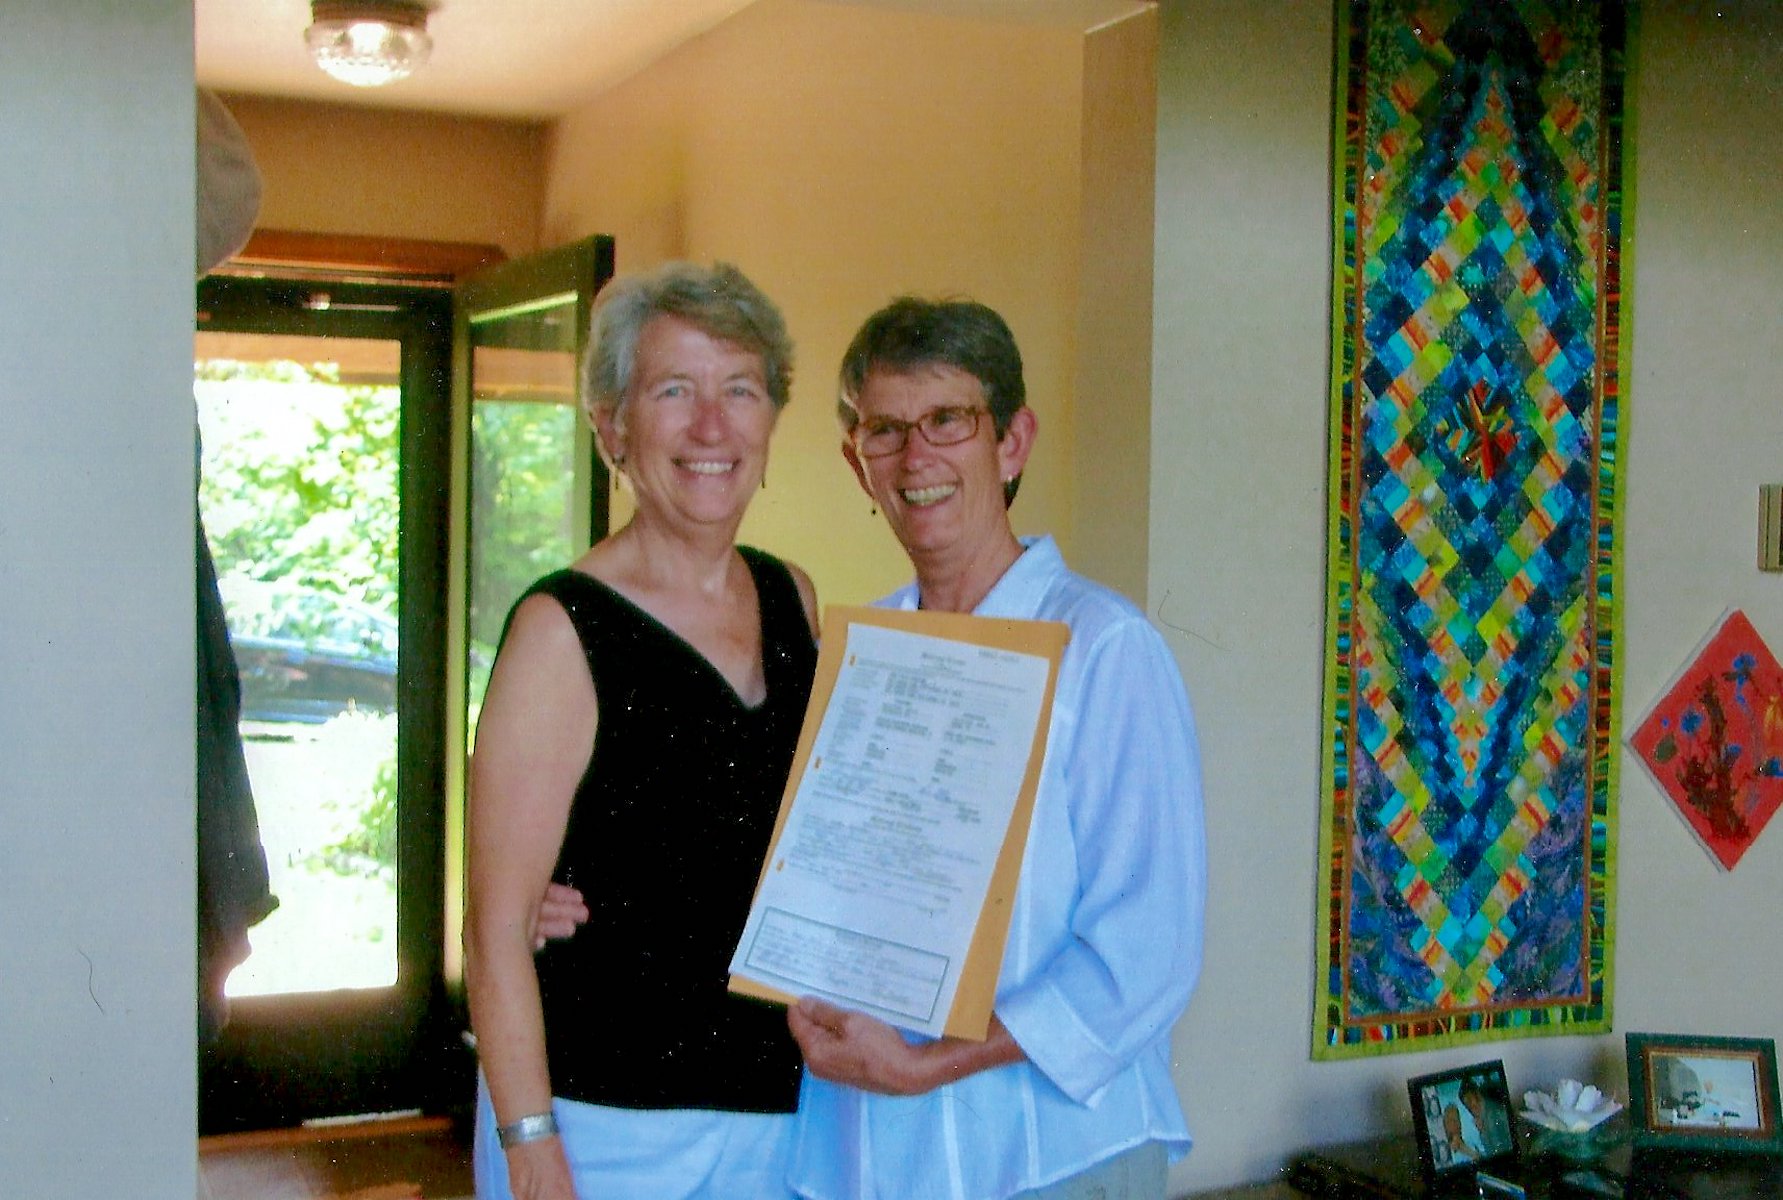 Kim Stacy (age 58) with her wife Anne Harrison at their marriage ceremony, July 16, 2015.